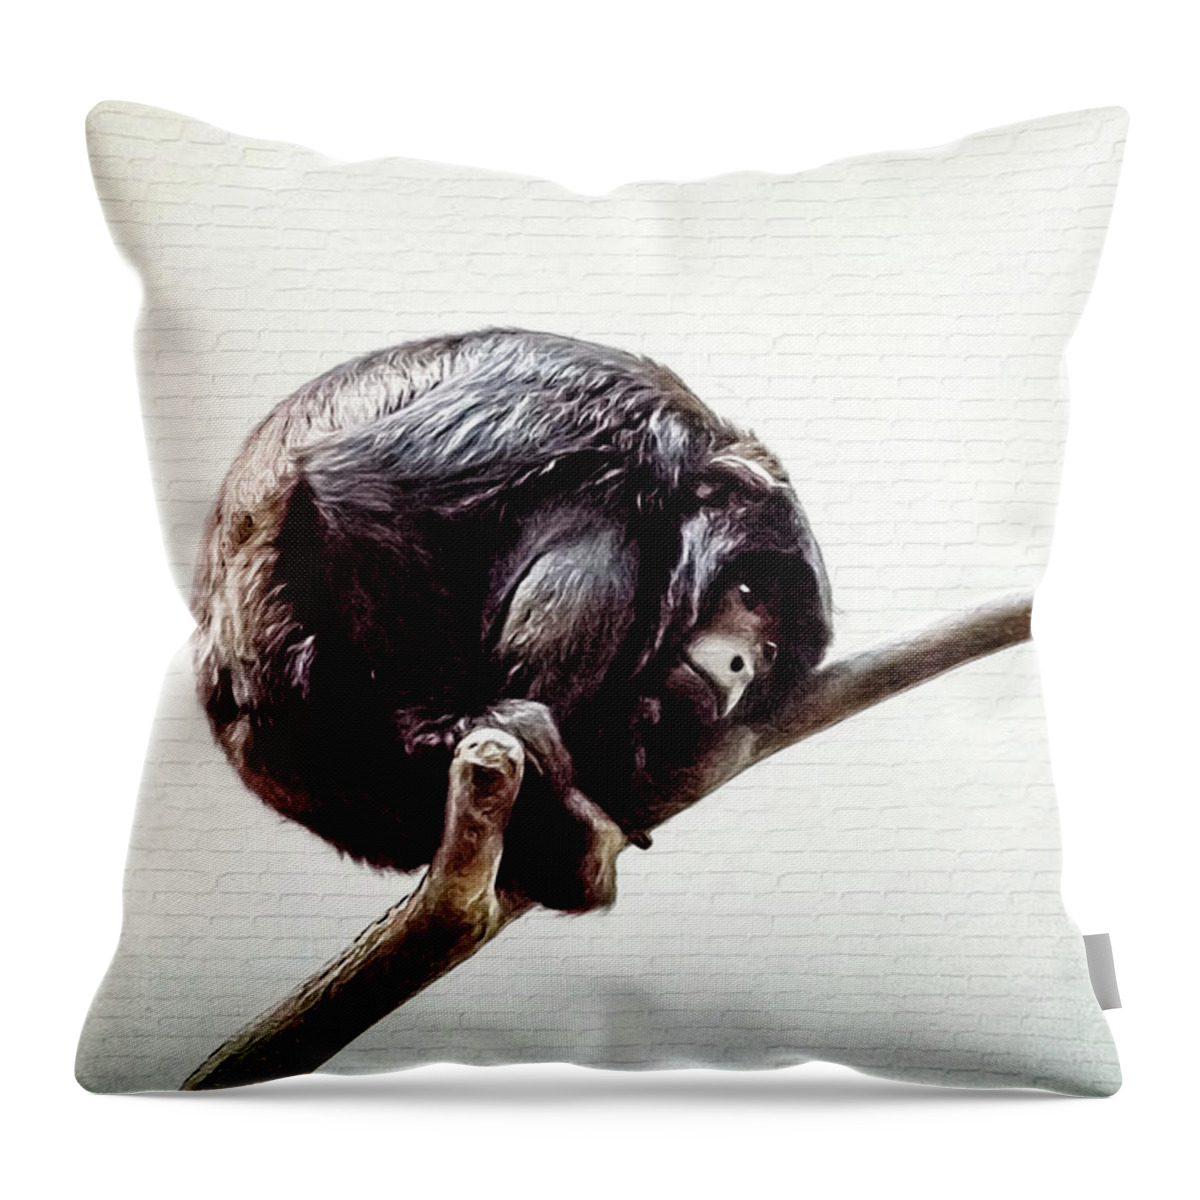 Chimpanzee Throw Pillow featuring the digital art Lonely Urban Chimpanzee by Tracie Schiebel